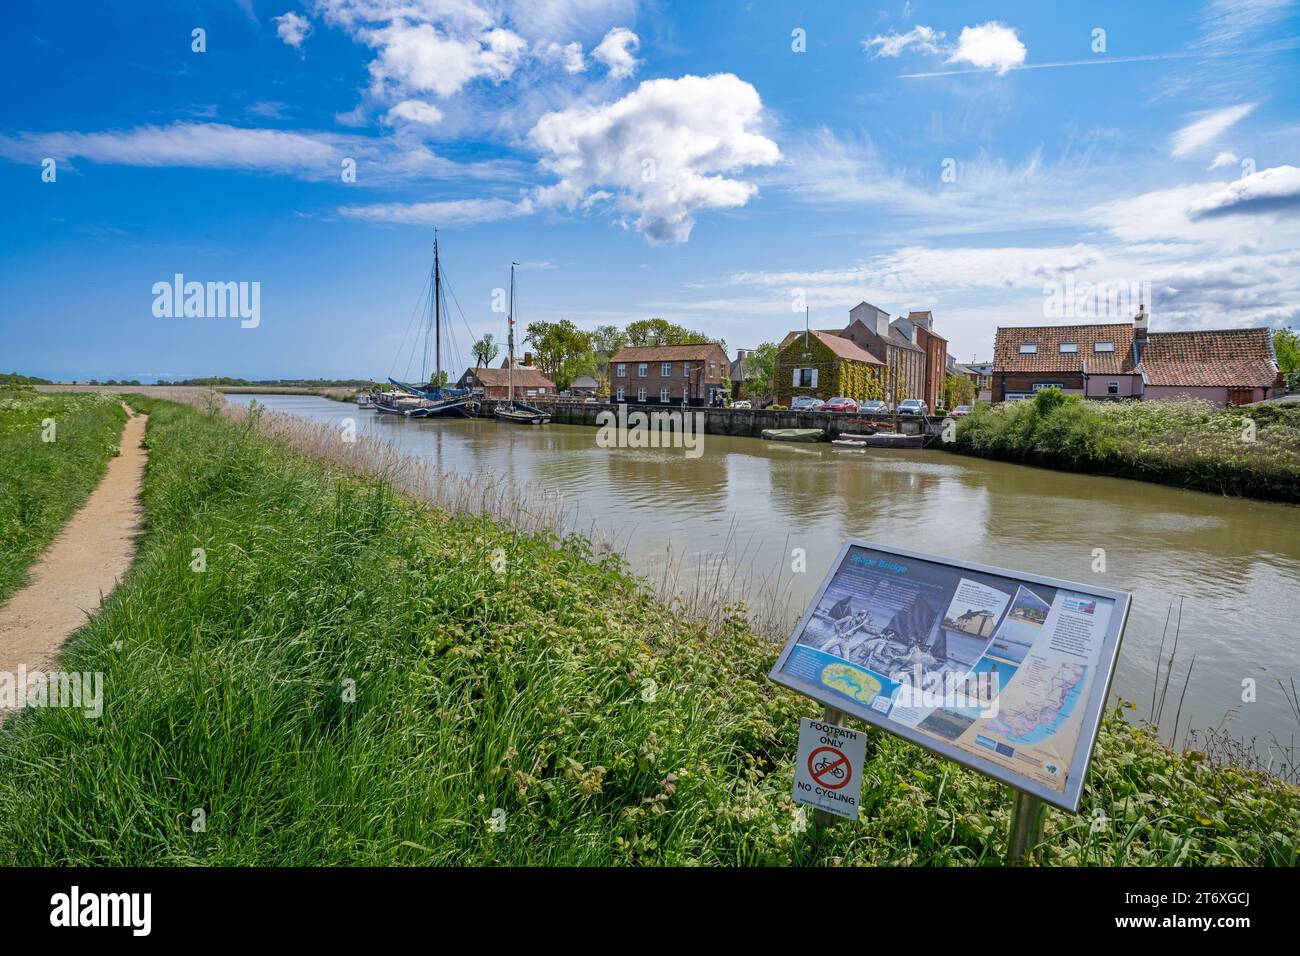 Snape Maltings sits on the bank of the River Alde, surrounded by an Area of Outstanding Natural Beauty, Snape, Suufolk, England Stock Photo